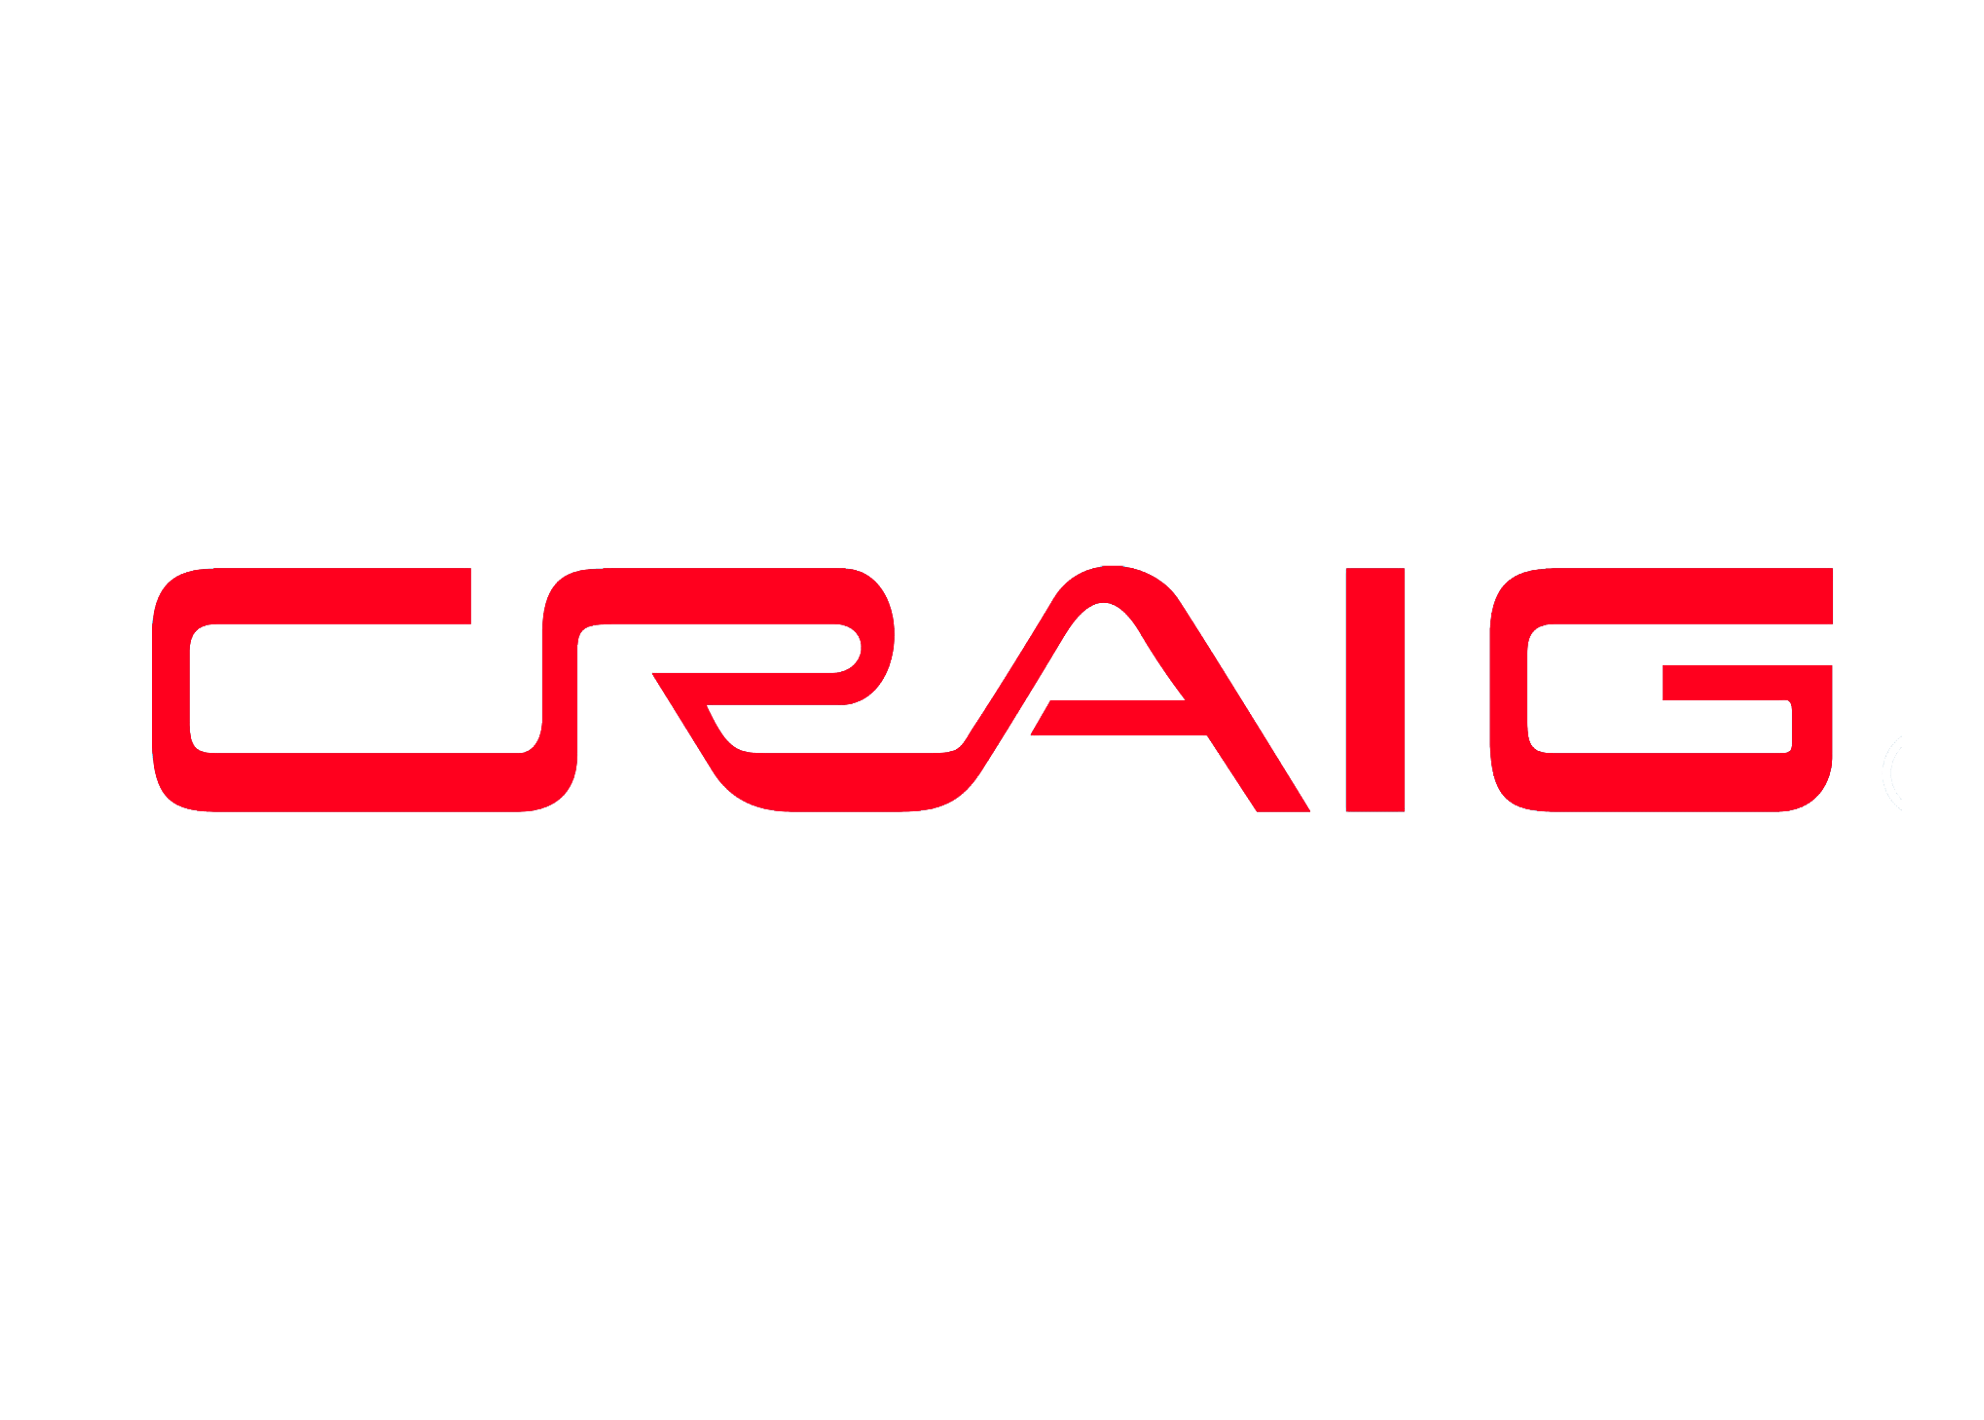 Craig Electronics Enters Into MPEG-2 and ATSC Licenses with MPEG LA